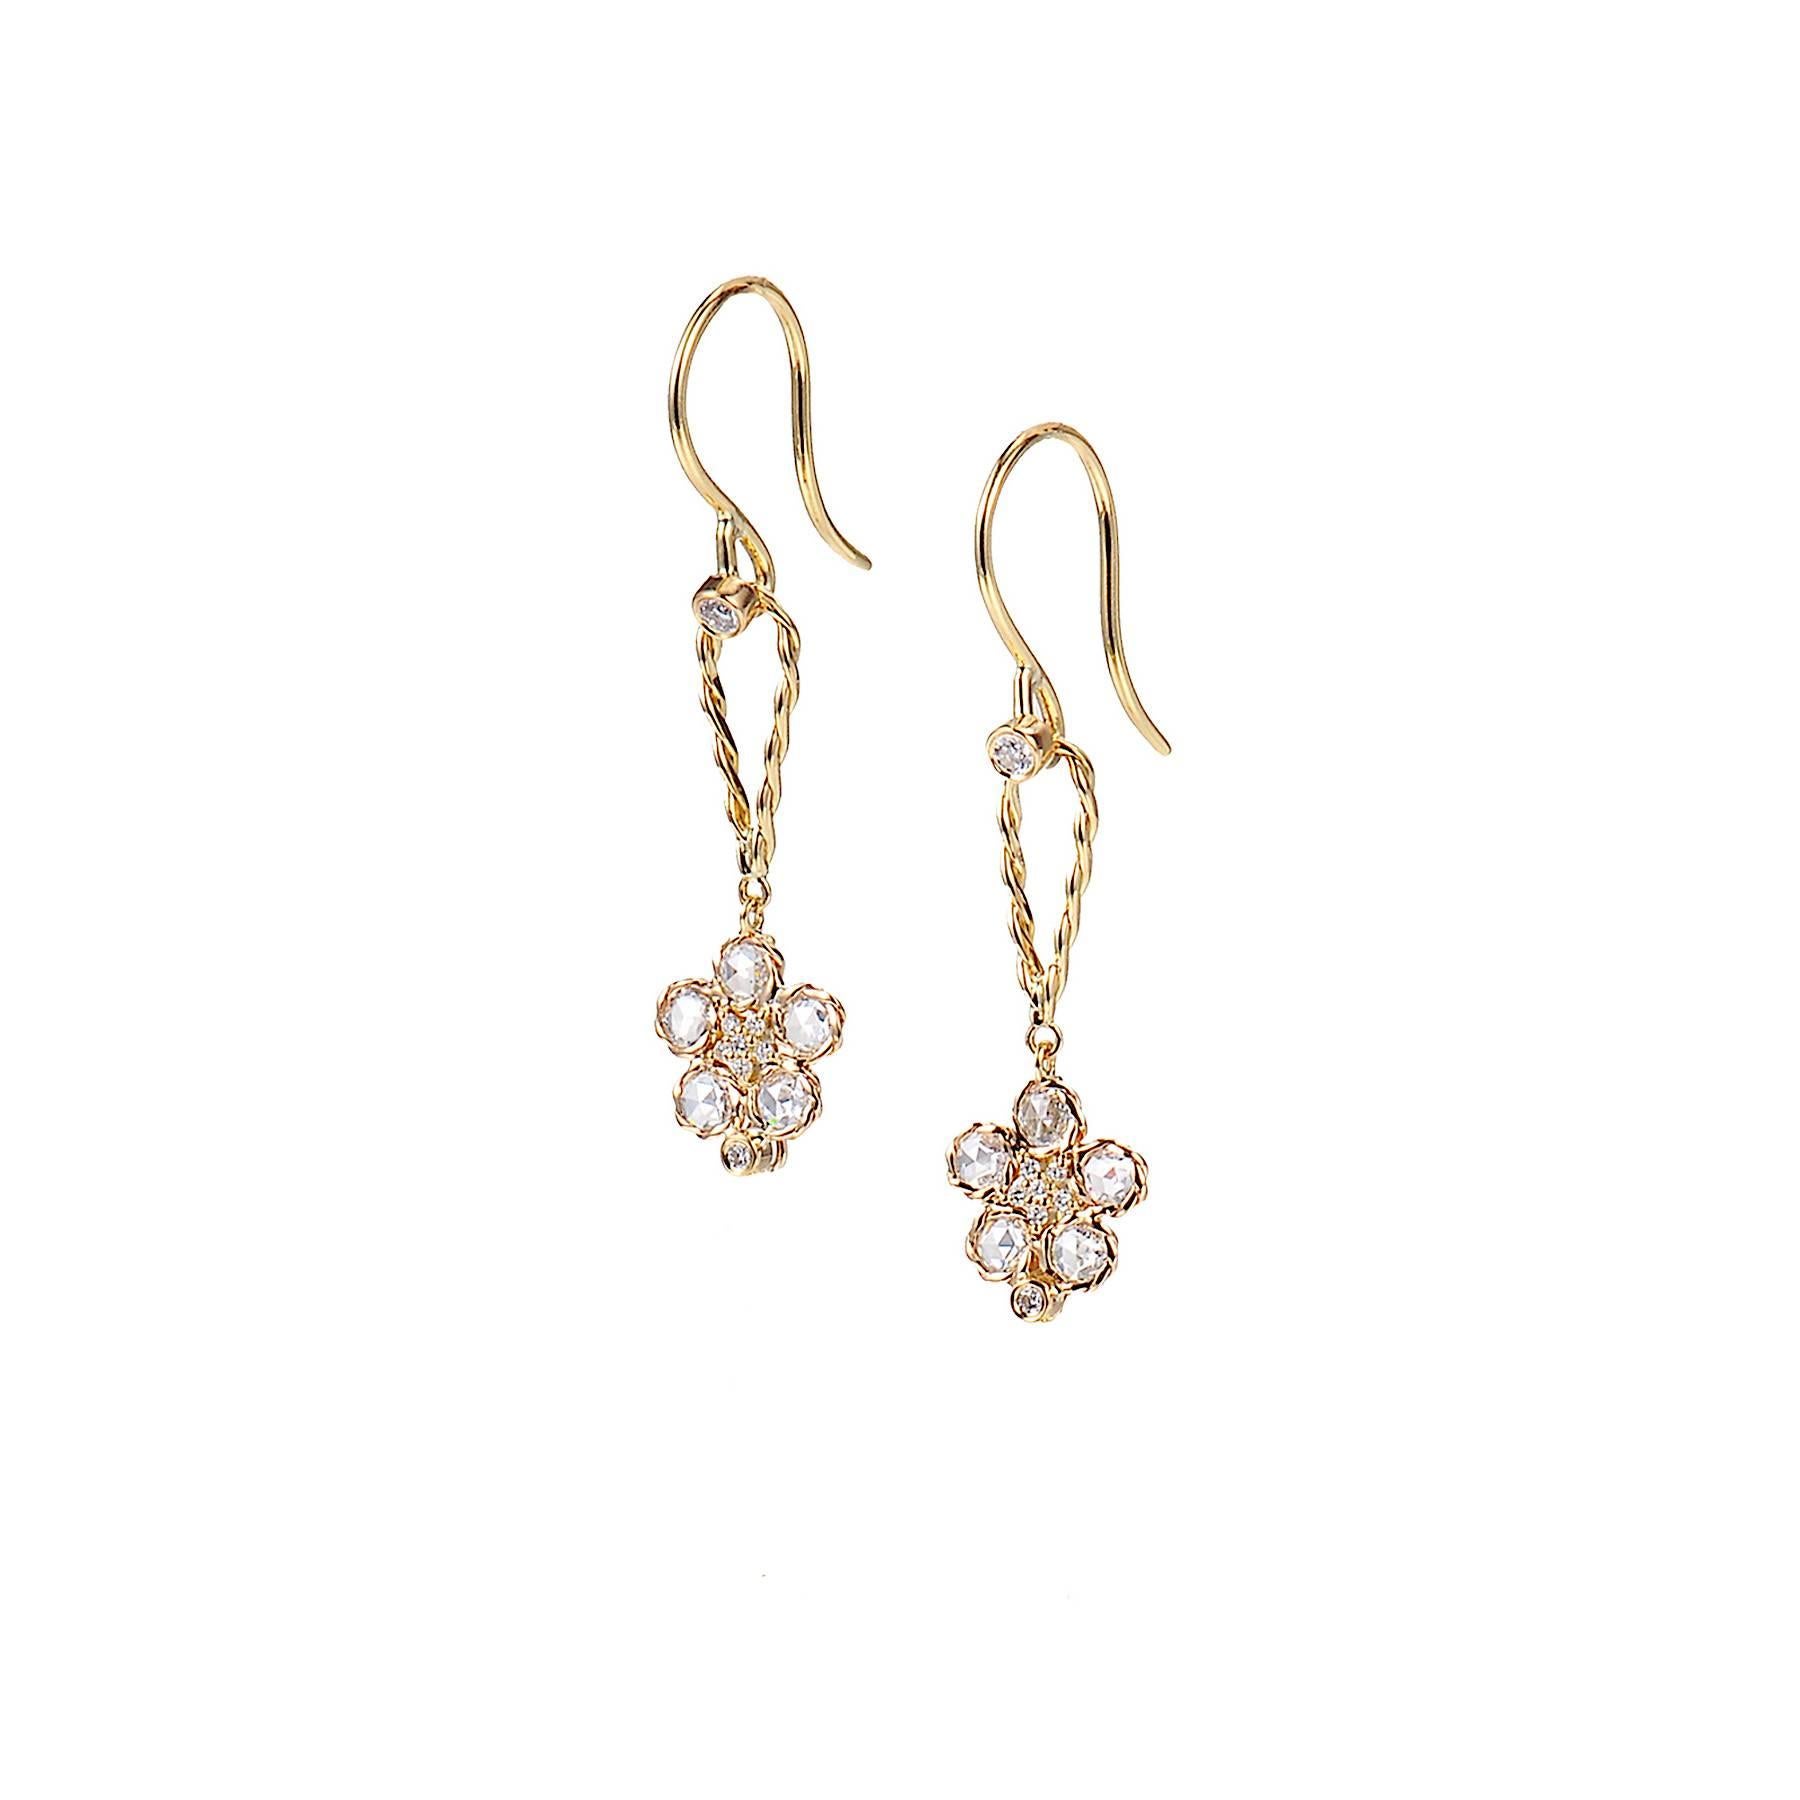 Persephone earrings is from JeweLyrie's Allongé collection,  each featuring 5 rose-cut white diamonds,  hand set in JeweLyrie signature twist bezels, punctuated with small brilliant cut bezel set diamonds, arranged in floral pattern.  The wavy vine